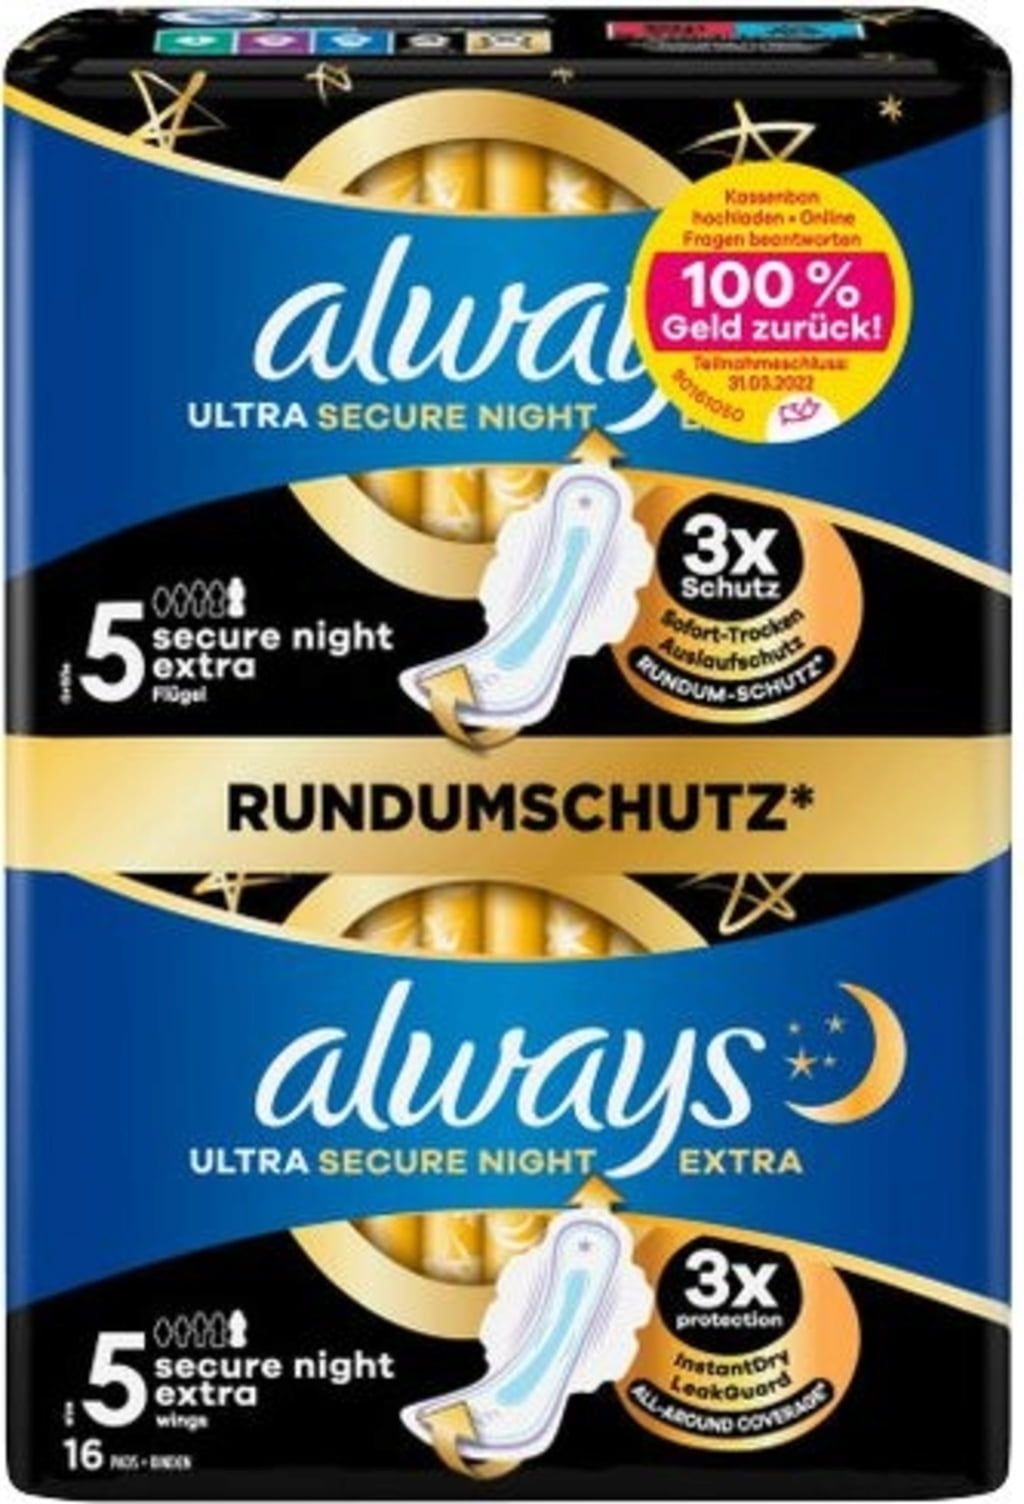 always Ultra Secure Night Extra Pads With Wings - Size 5, 16 Pcs